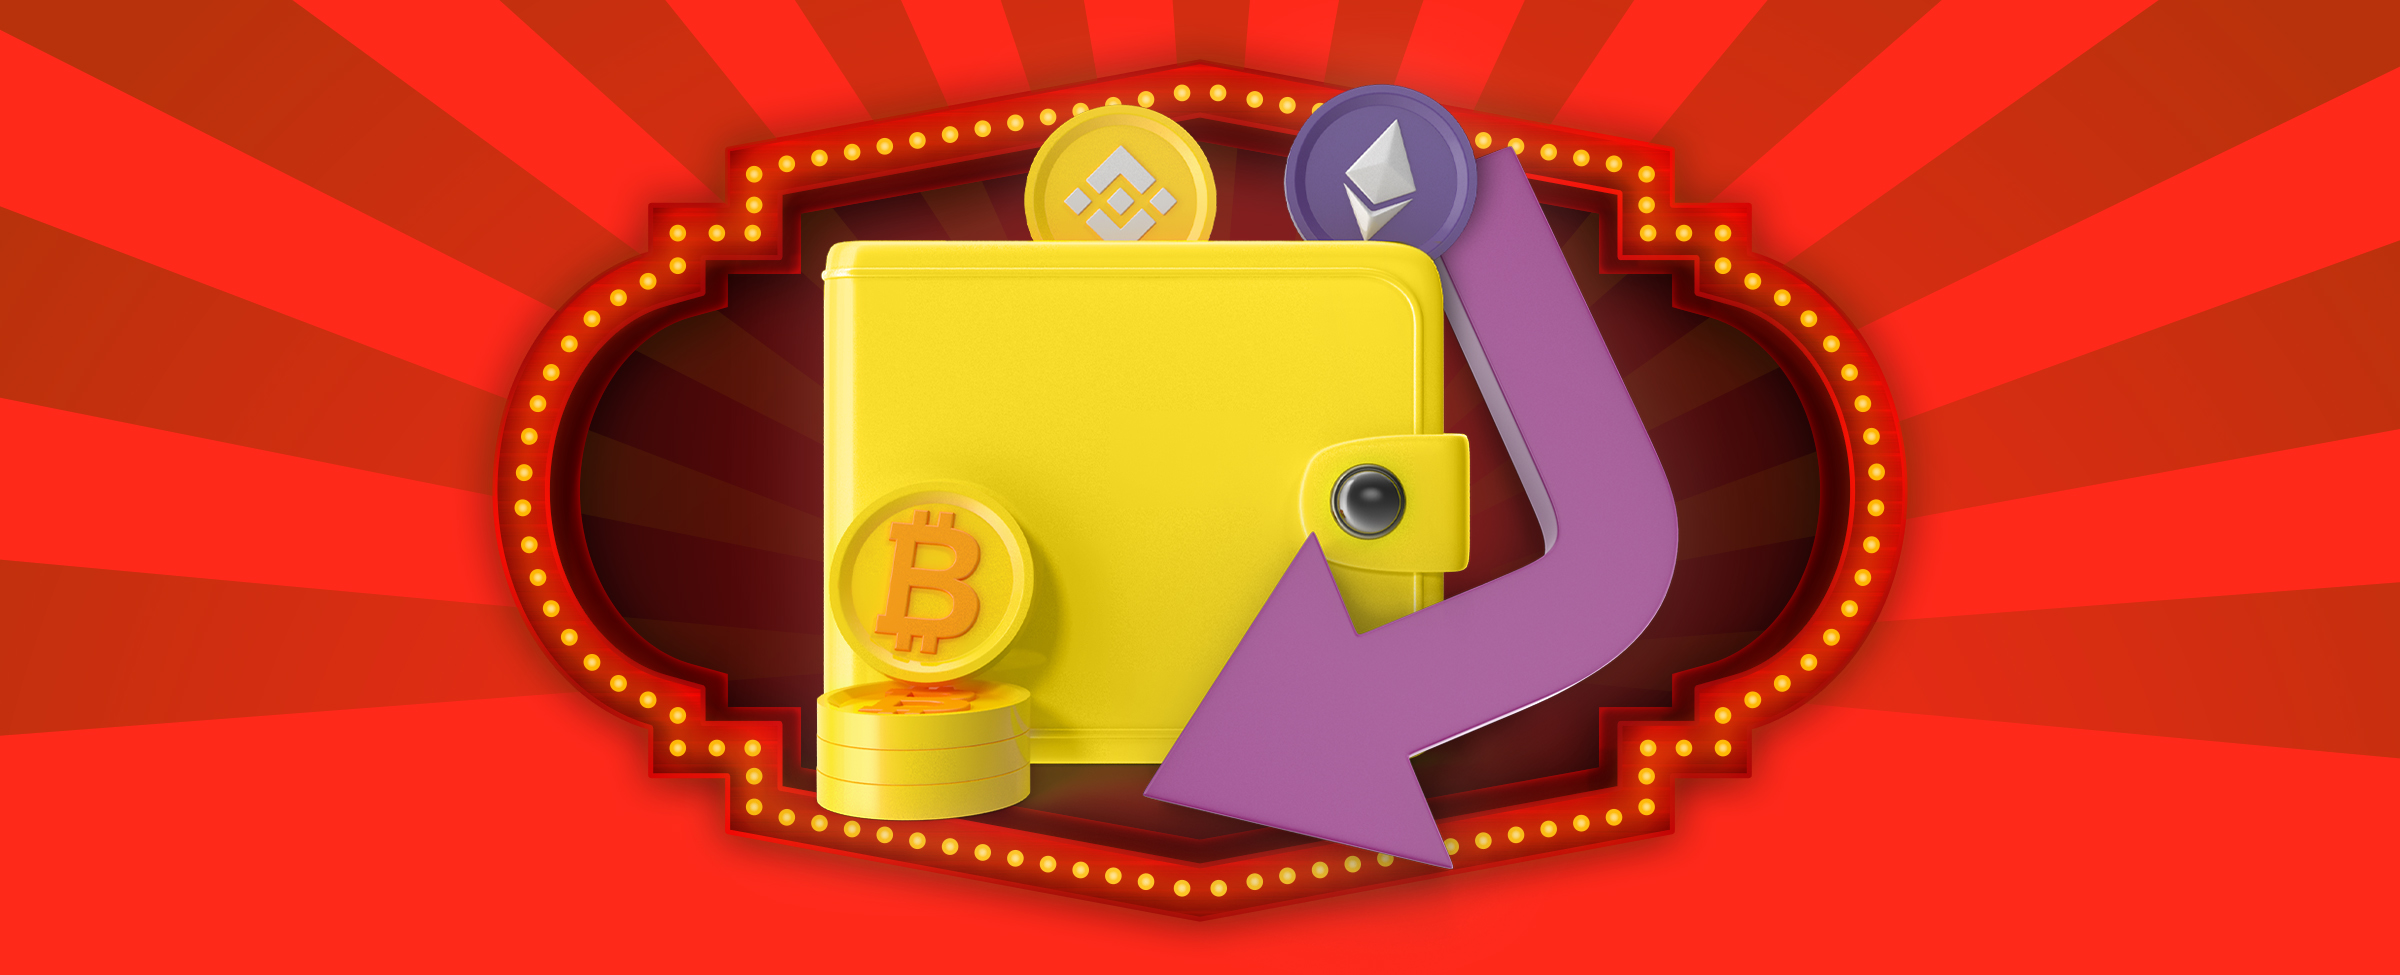 Resting against a 3D yellow wallet is a yellow bitcoin bearing an orange logo, positioned on top of a trio of identical coins. Peeking out from behind the wallet are two cryptocurrency coins, one in a rich purple hue with an Ethereum logo, and the other in a bright yellow. A bold, illustrated arrow emerges from behind the wallet, directing attention to the yellow bitcoins in the foreground. Behind is a bulb-illuminated frame, accompanied by a two-tone red striped horizon.